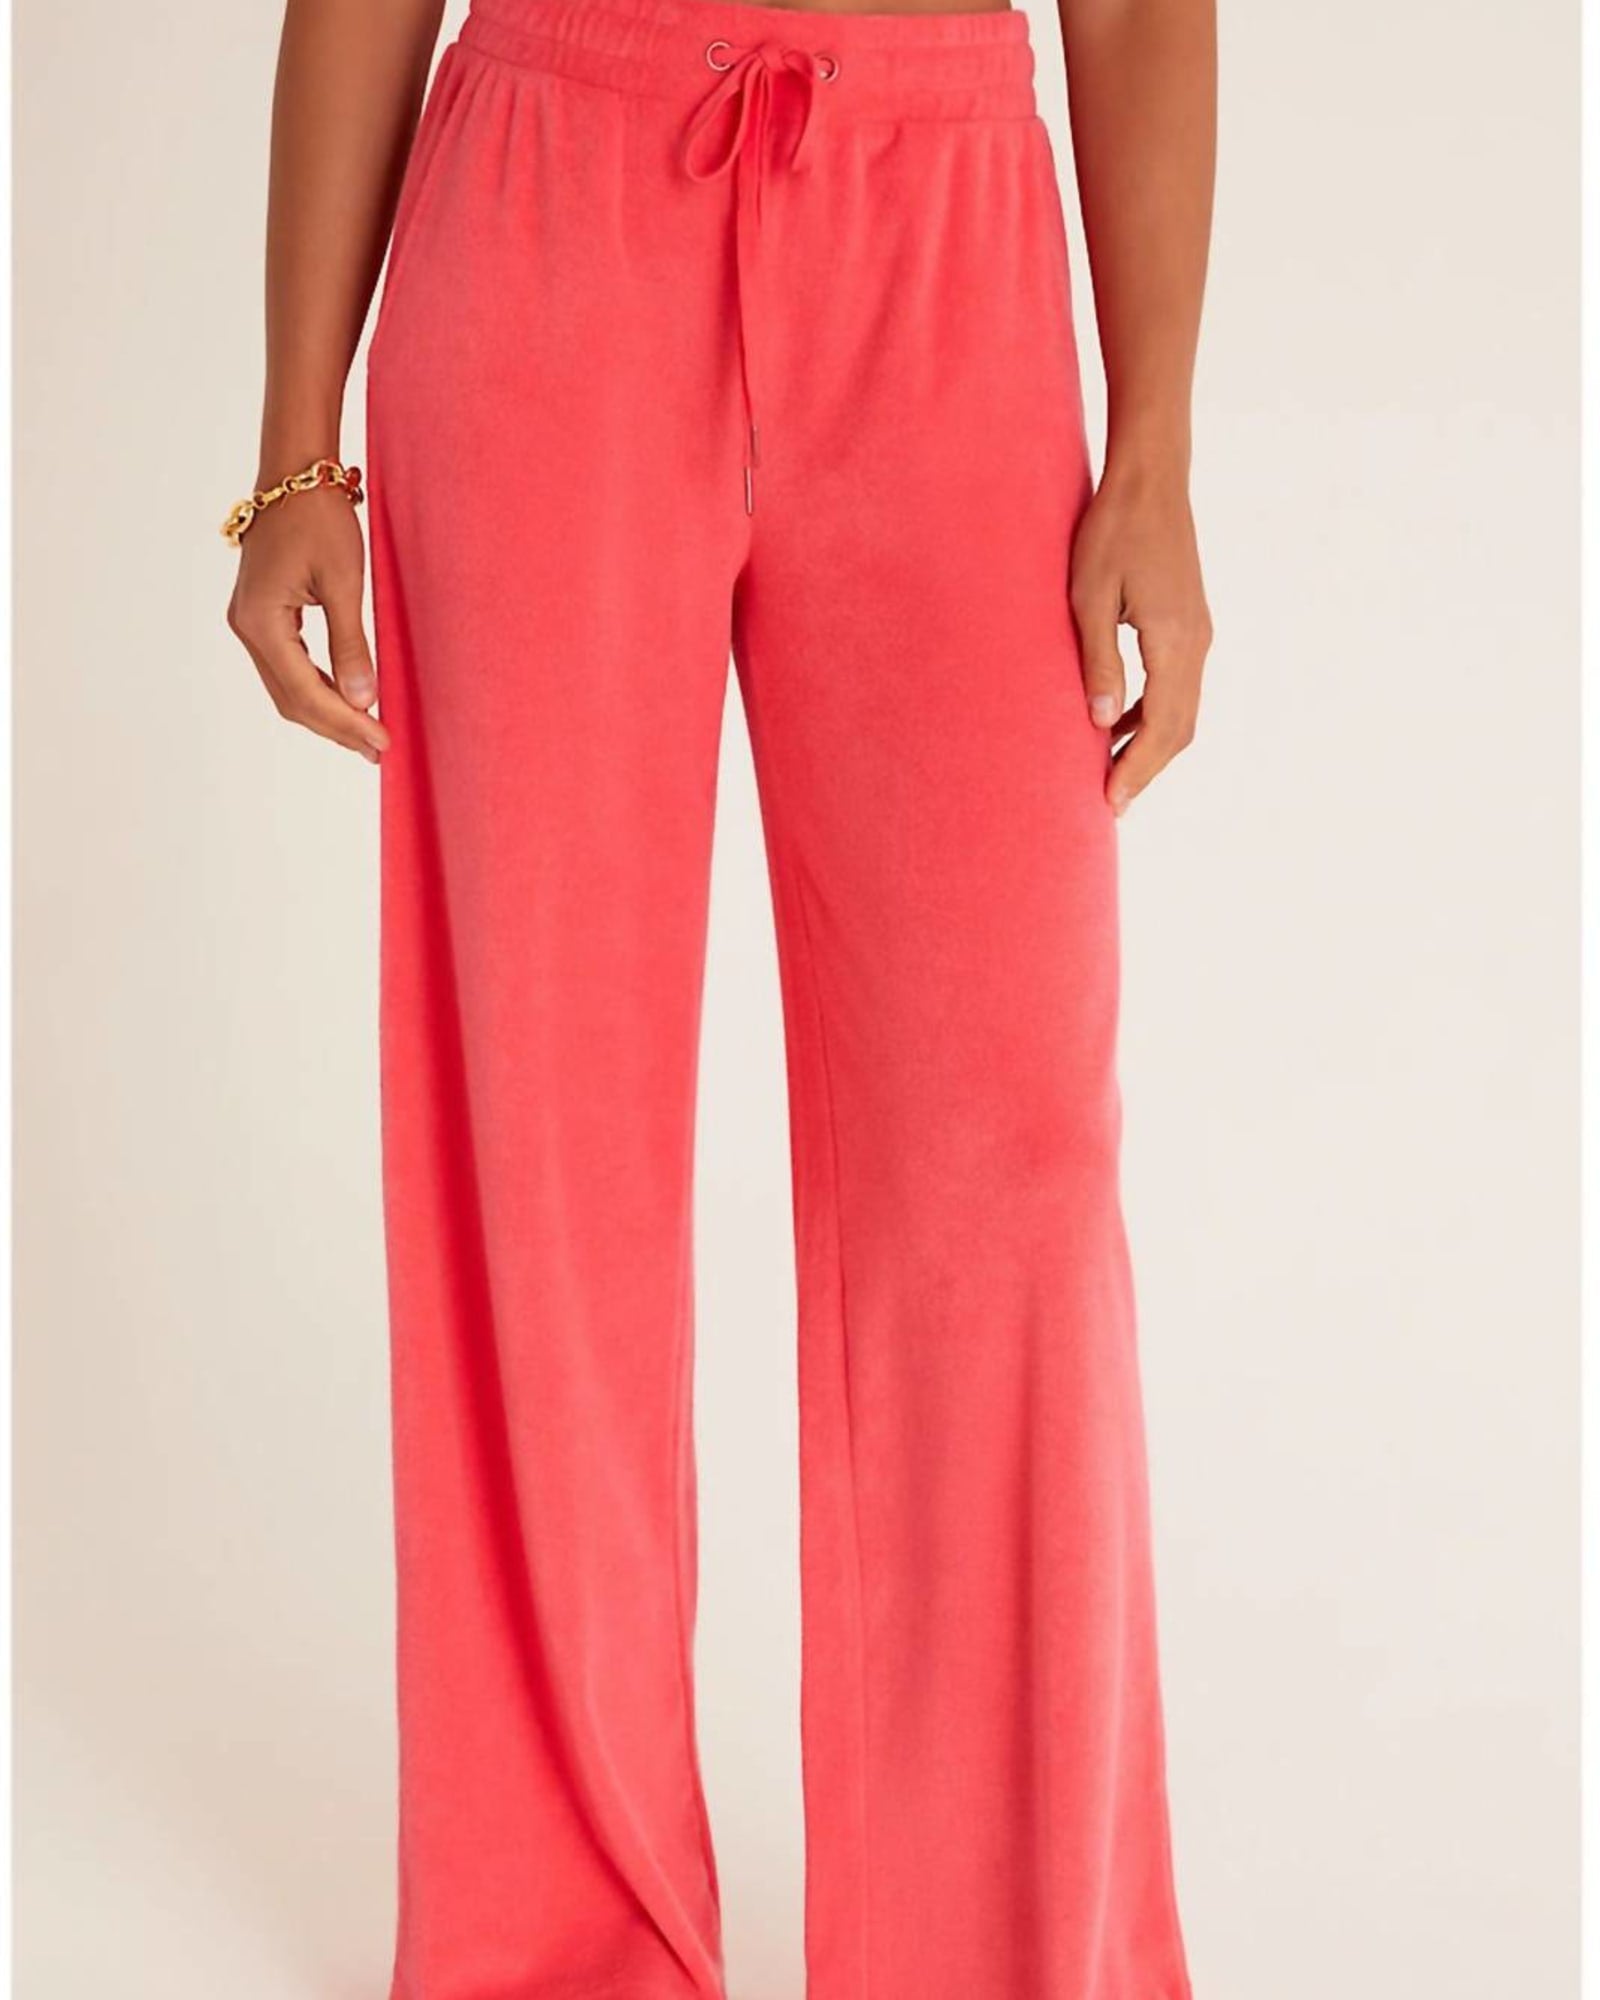 Cali Loop Terry Pant in Strawberry | Strawberry